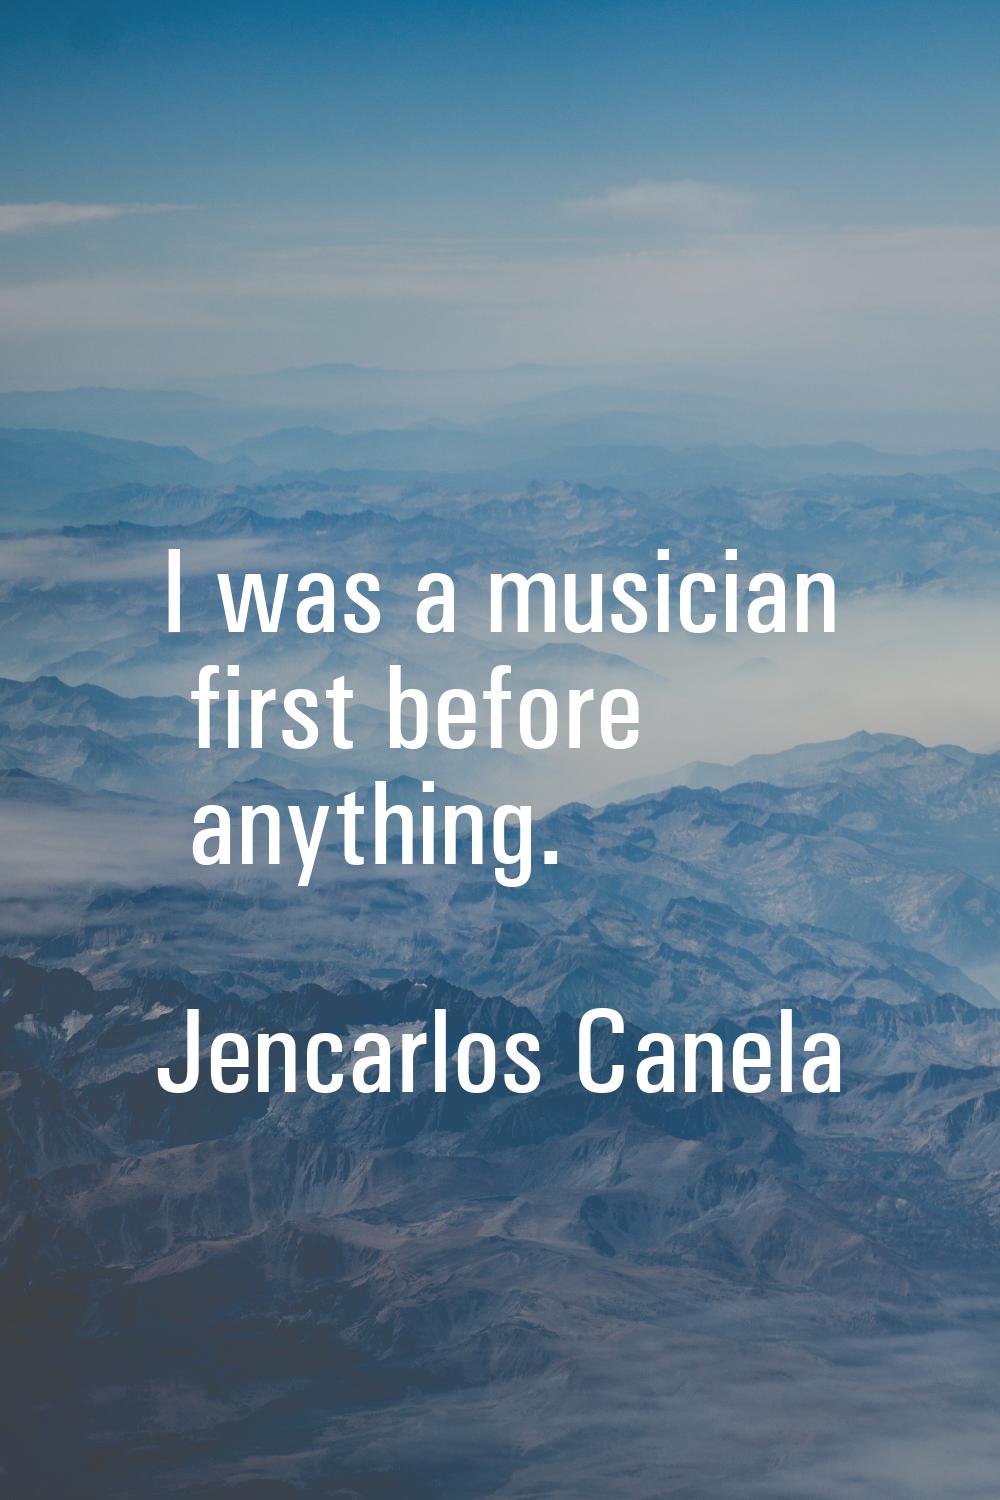 I was a musician first before anything.